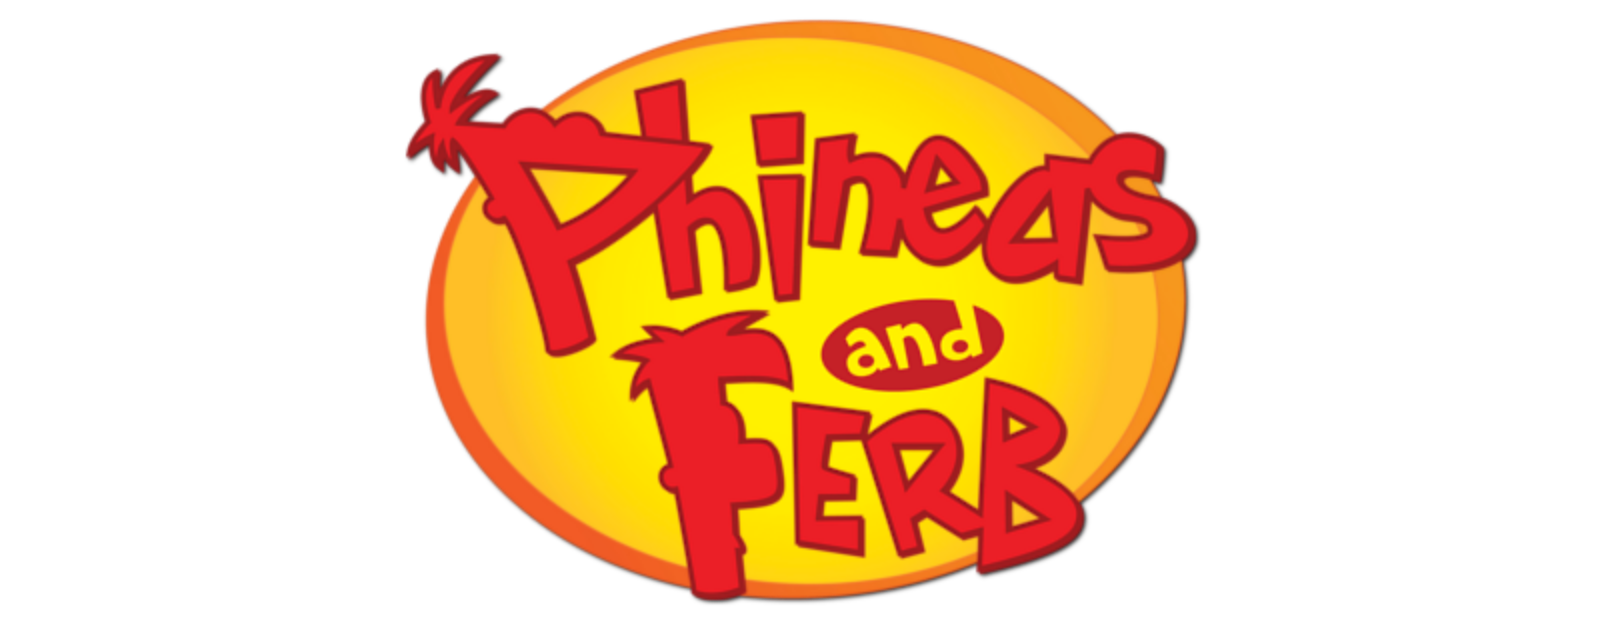 Phineas and Ferb Complete (14 DVDs Box Set)